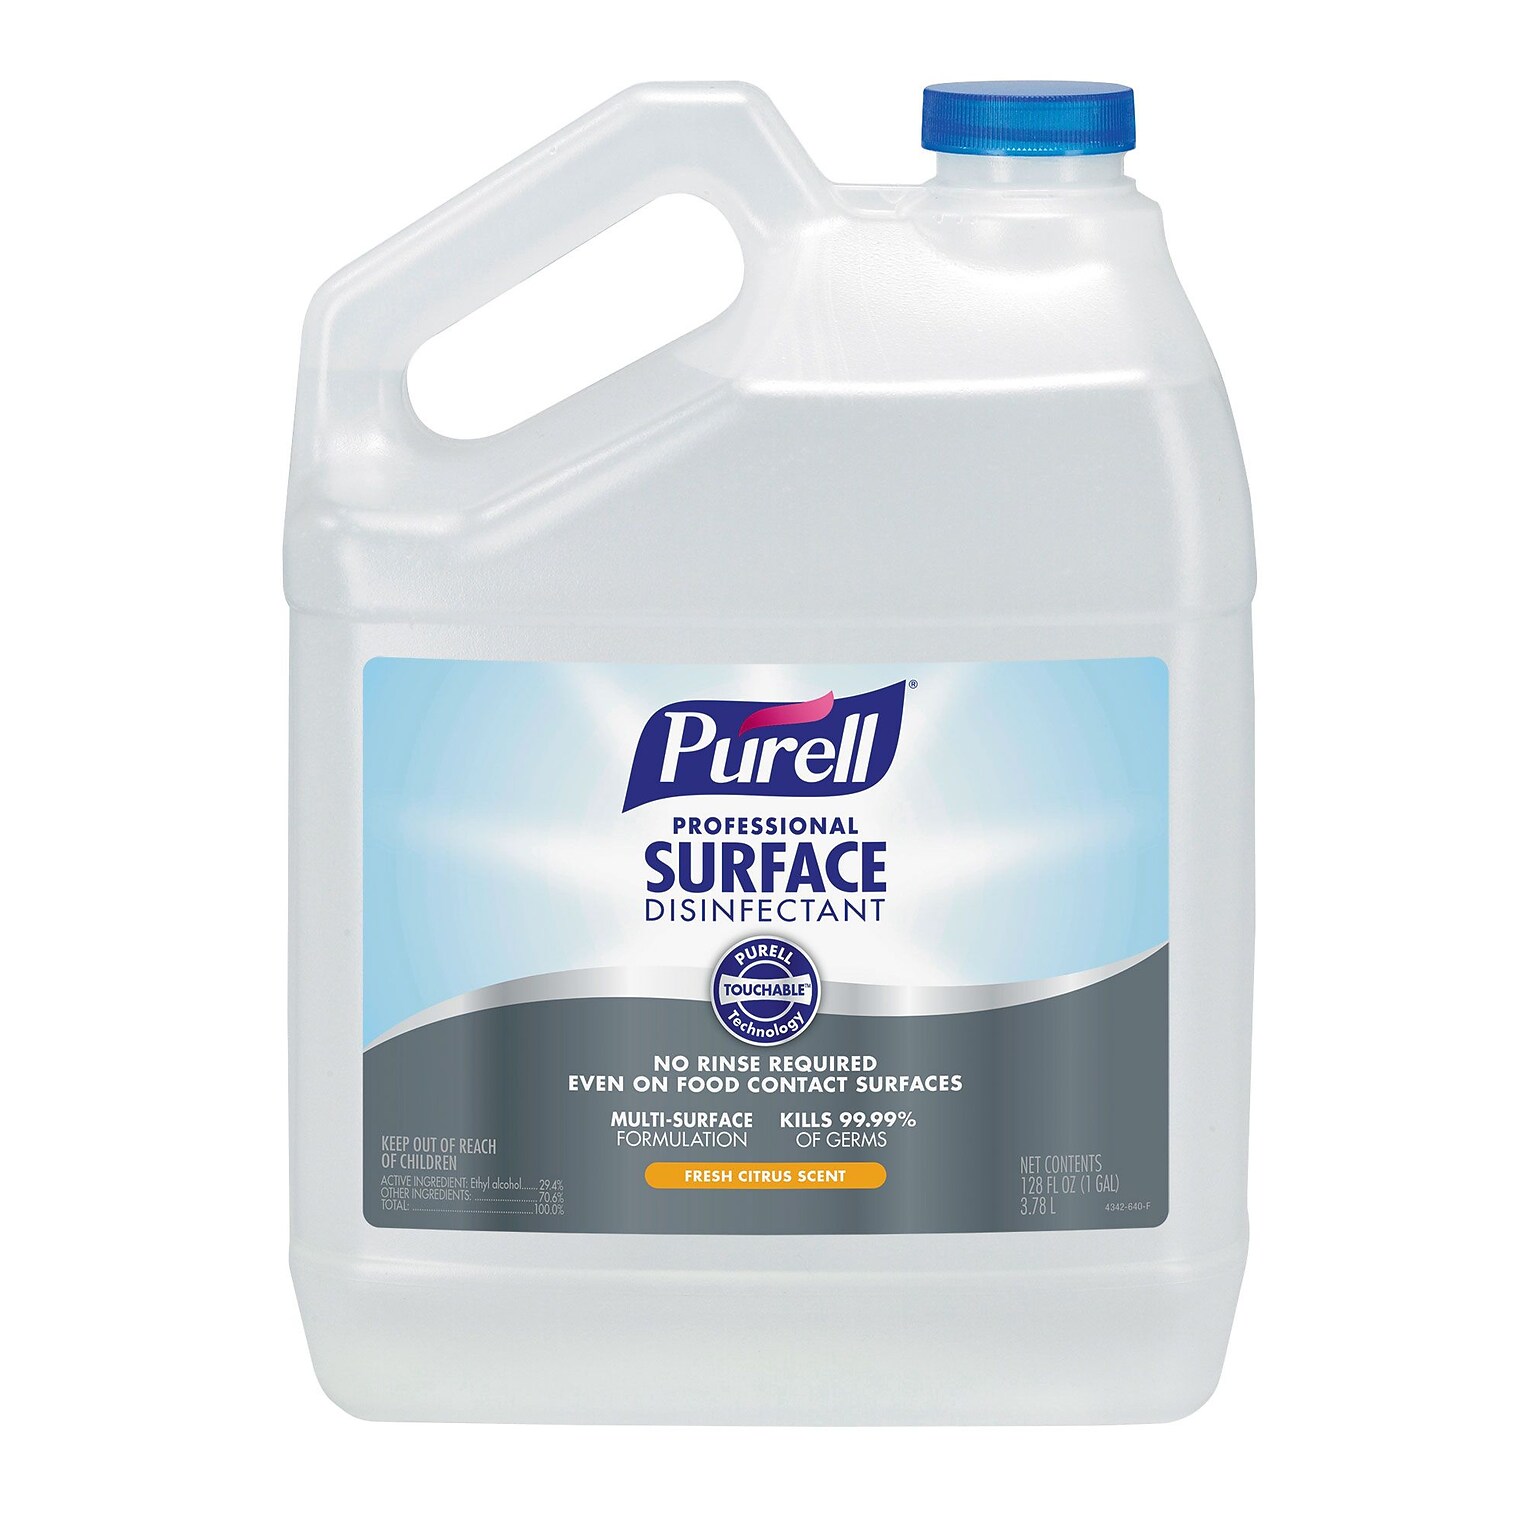 PURELL All-Purpose Cleaners & Spray Glass & Surface Cleaner Disinfectant Refill, Fresh Citrus Scent (4342-04)